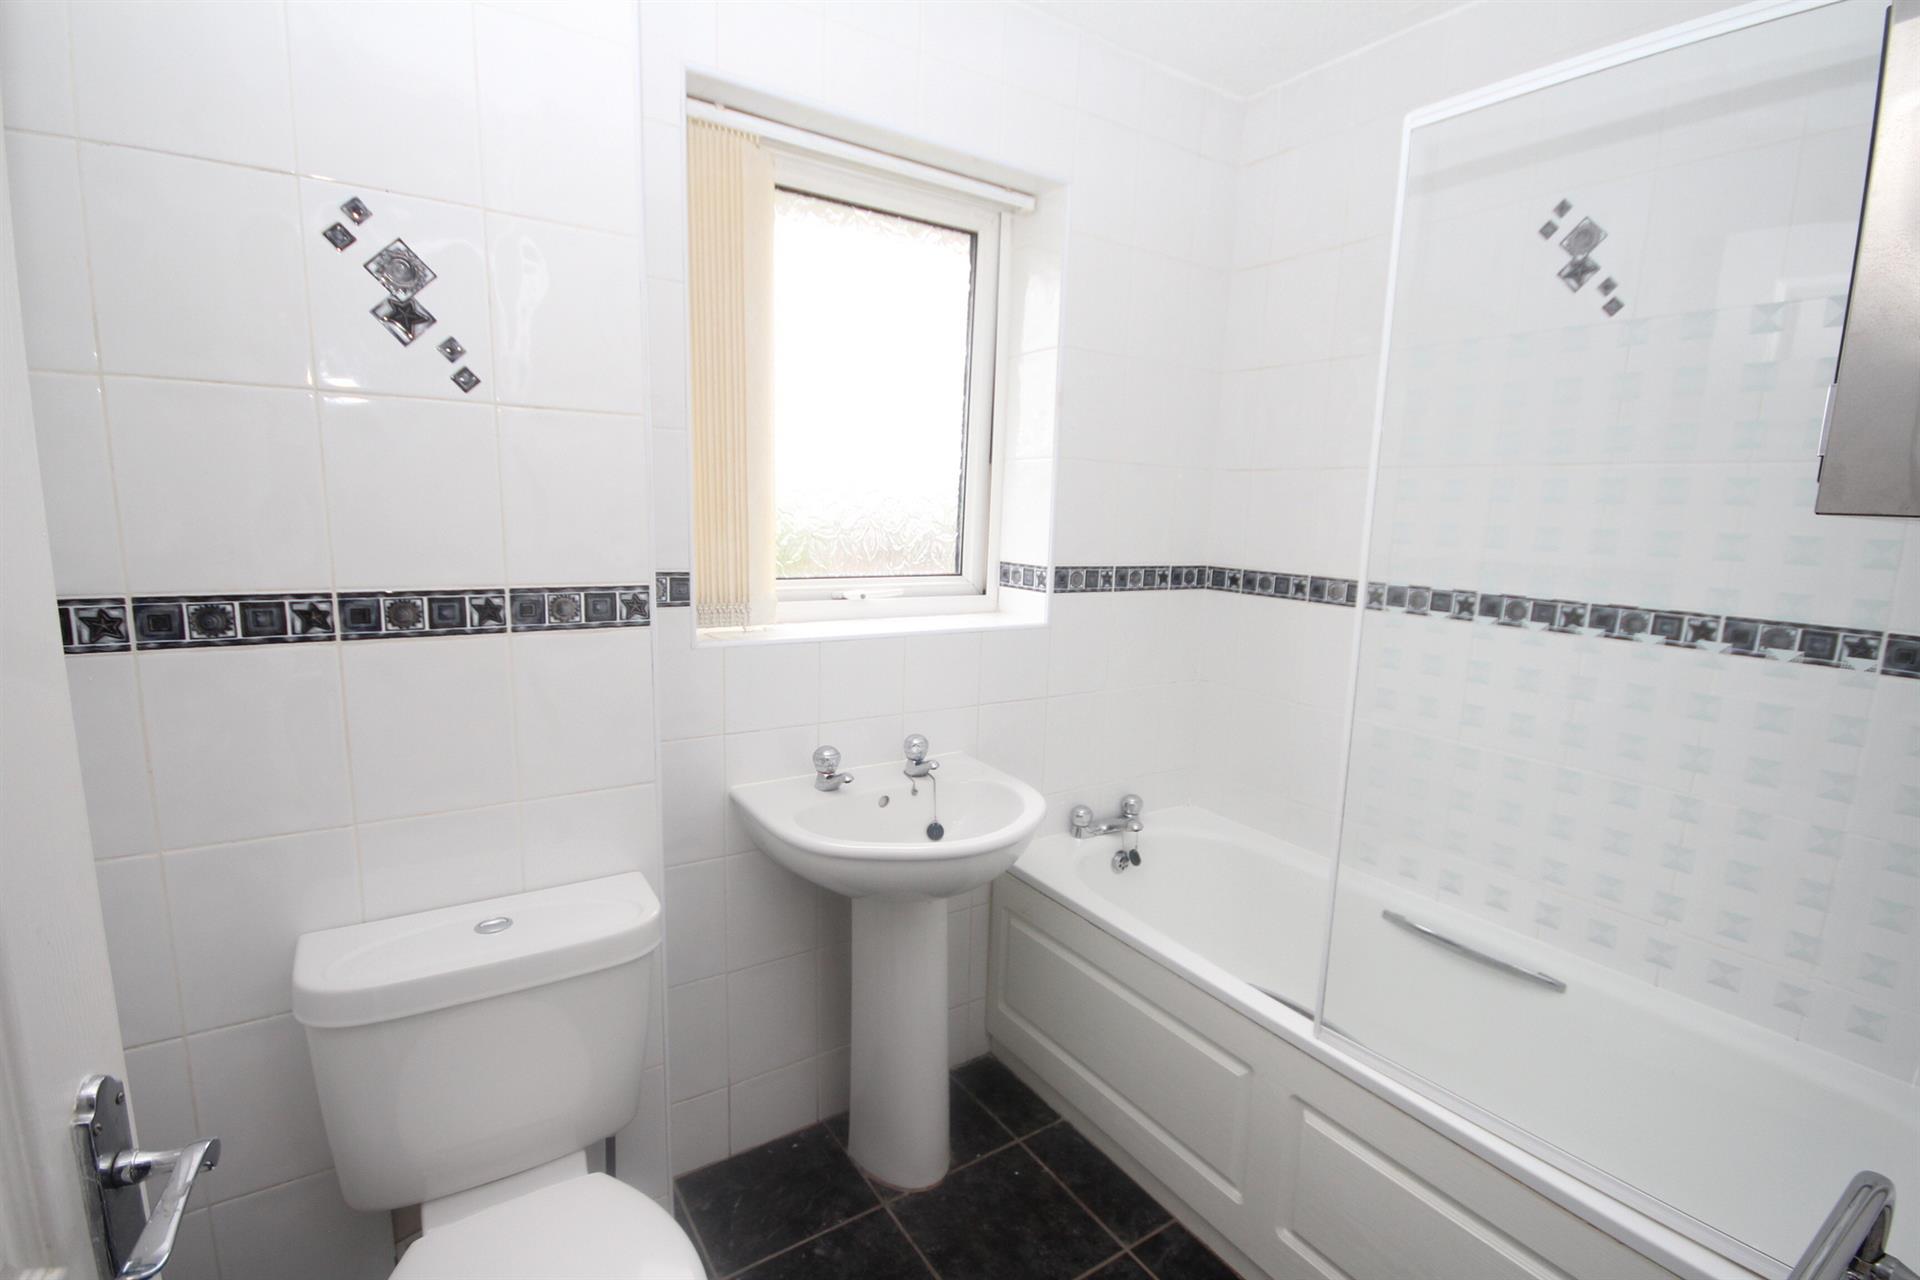 1 bedroom end terraced house Let Agreed in Bromley Cross, Bolton - Bathroom.